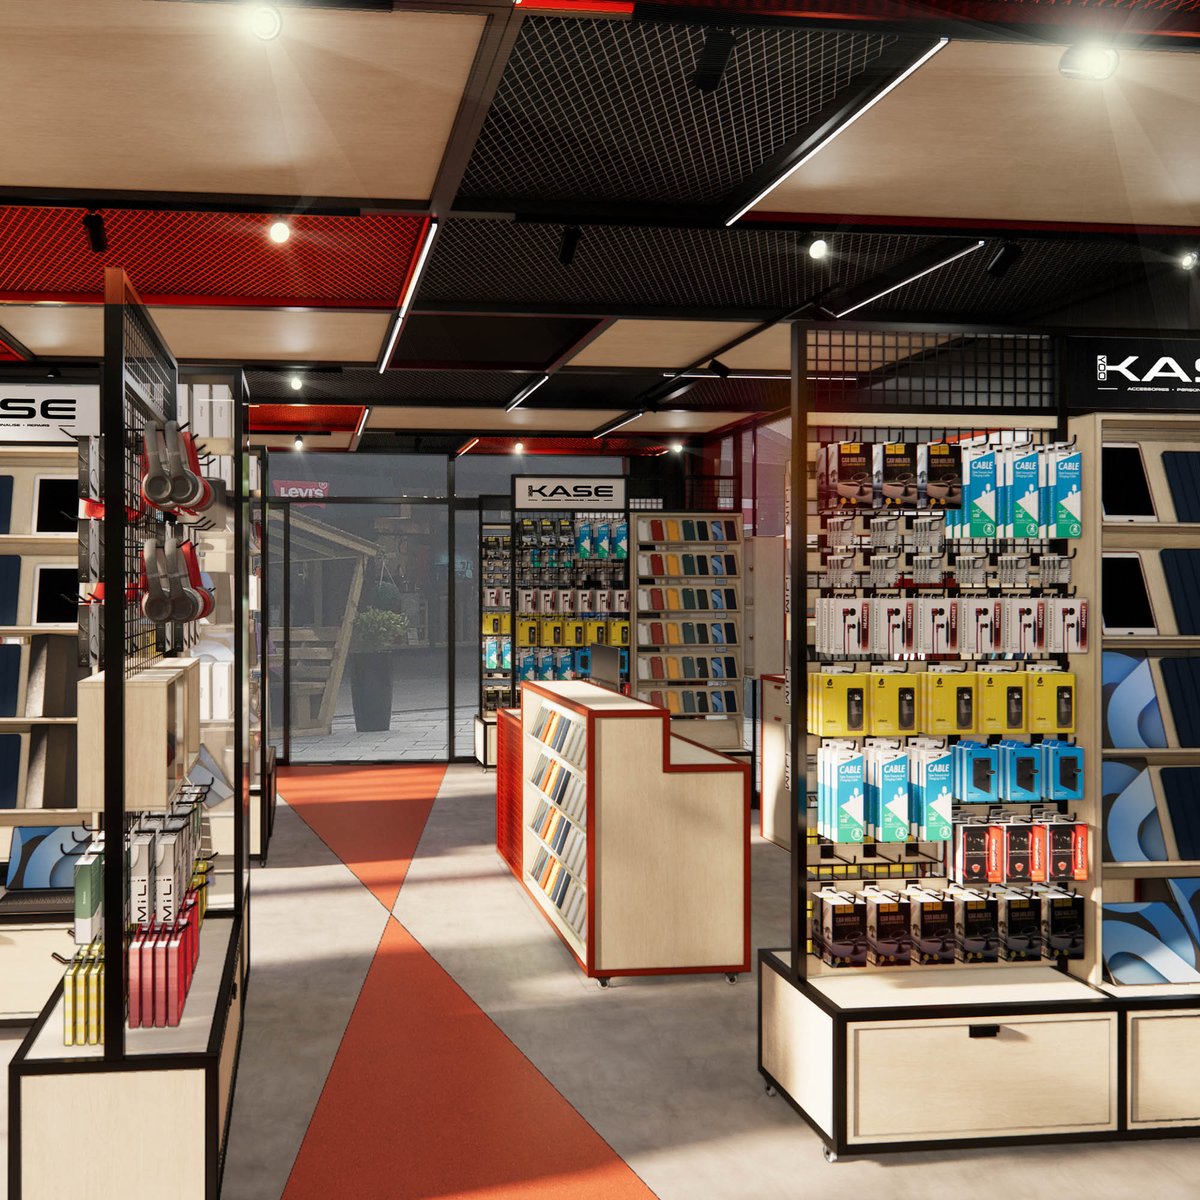 We recently produced a kiosk concept for a phone accessories retailer. High density display and storage was critical. Considered space-planning ensured that the final design also provided uncongested access through the environment. #retaildesign #interiordesign #retailconcept